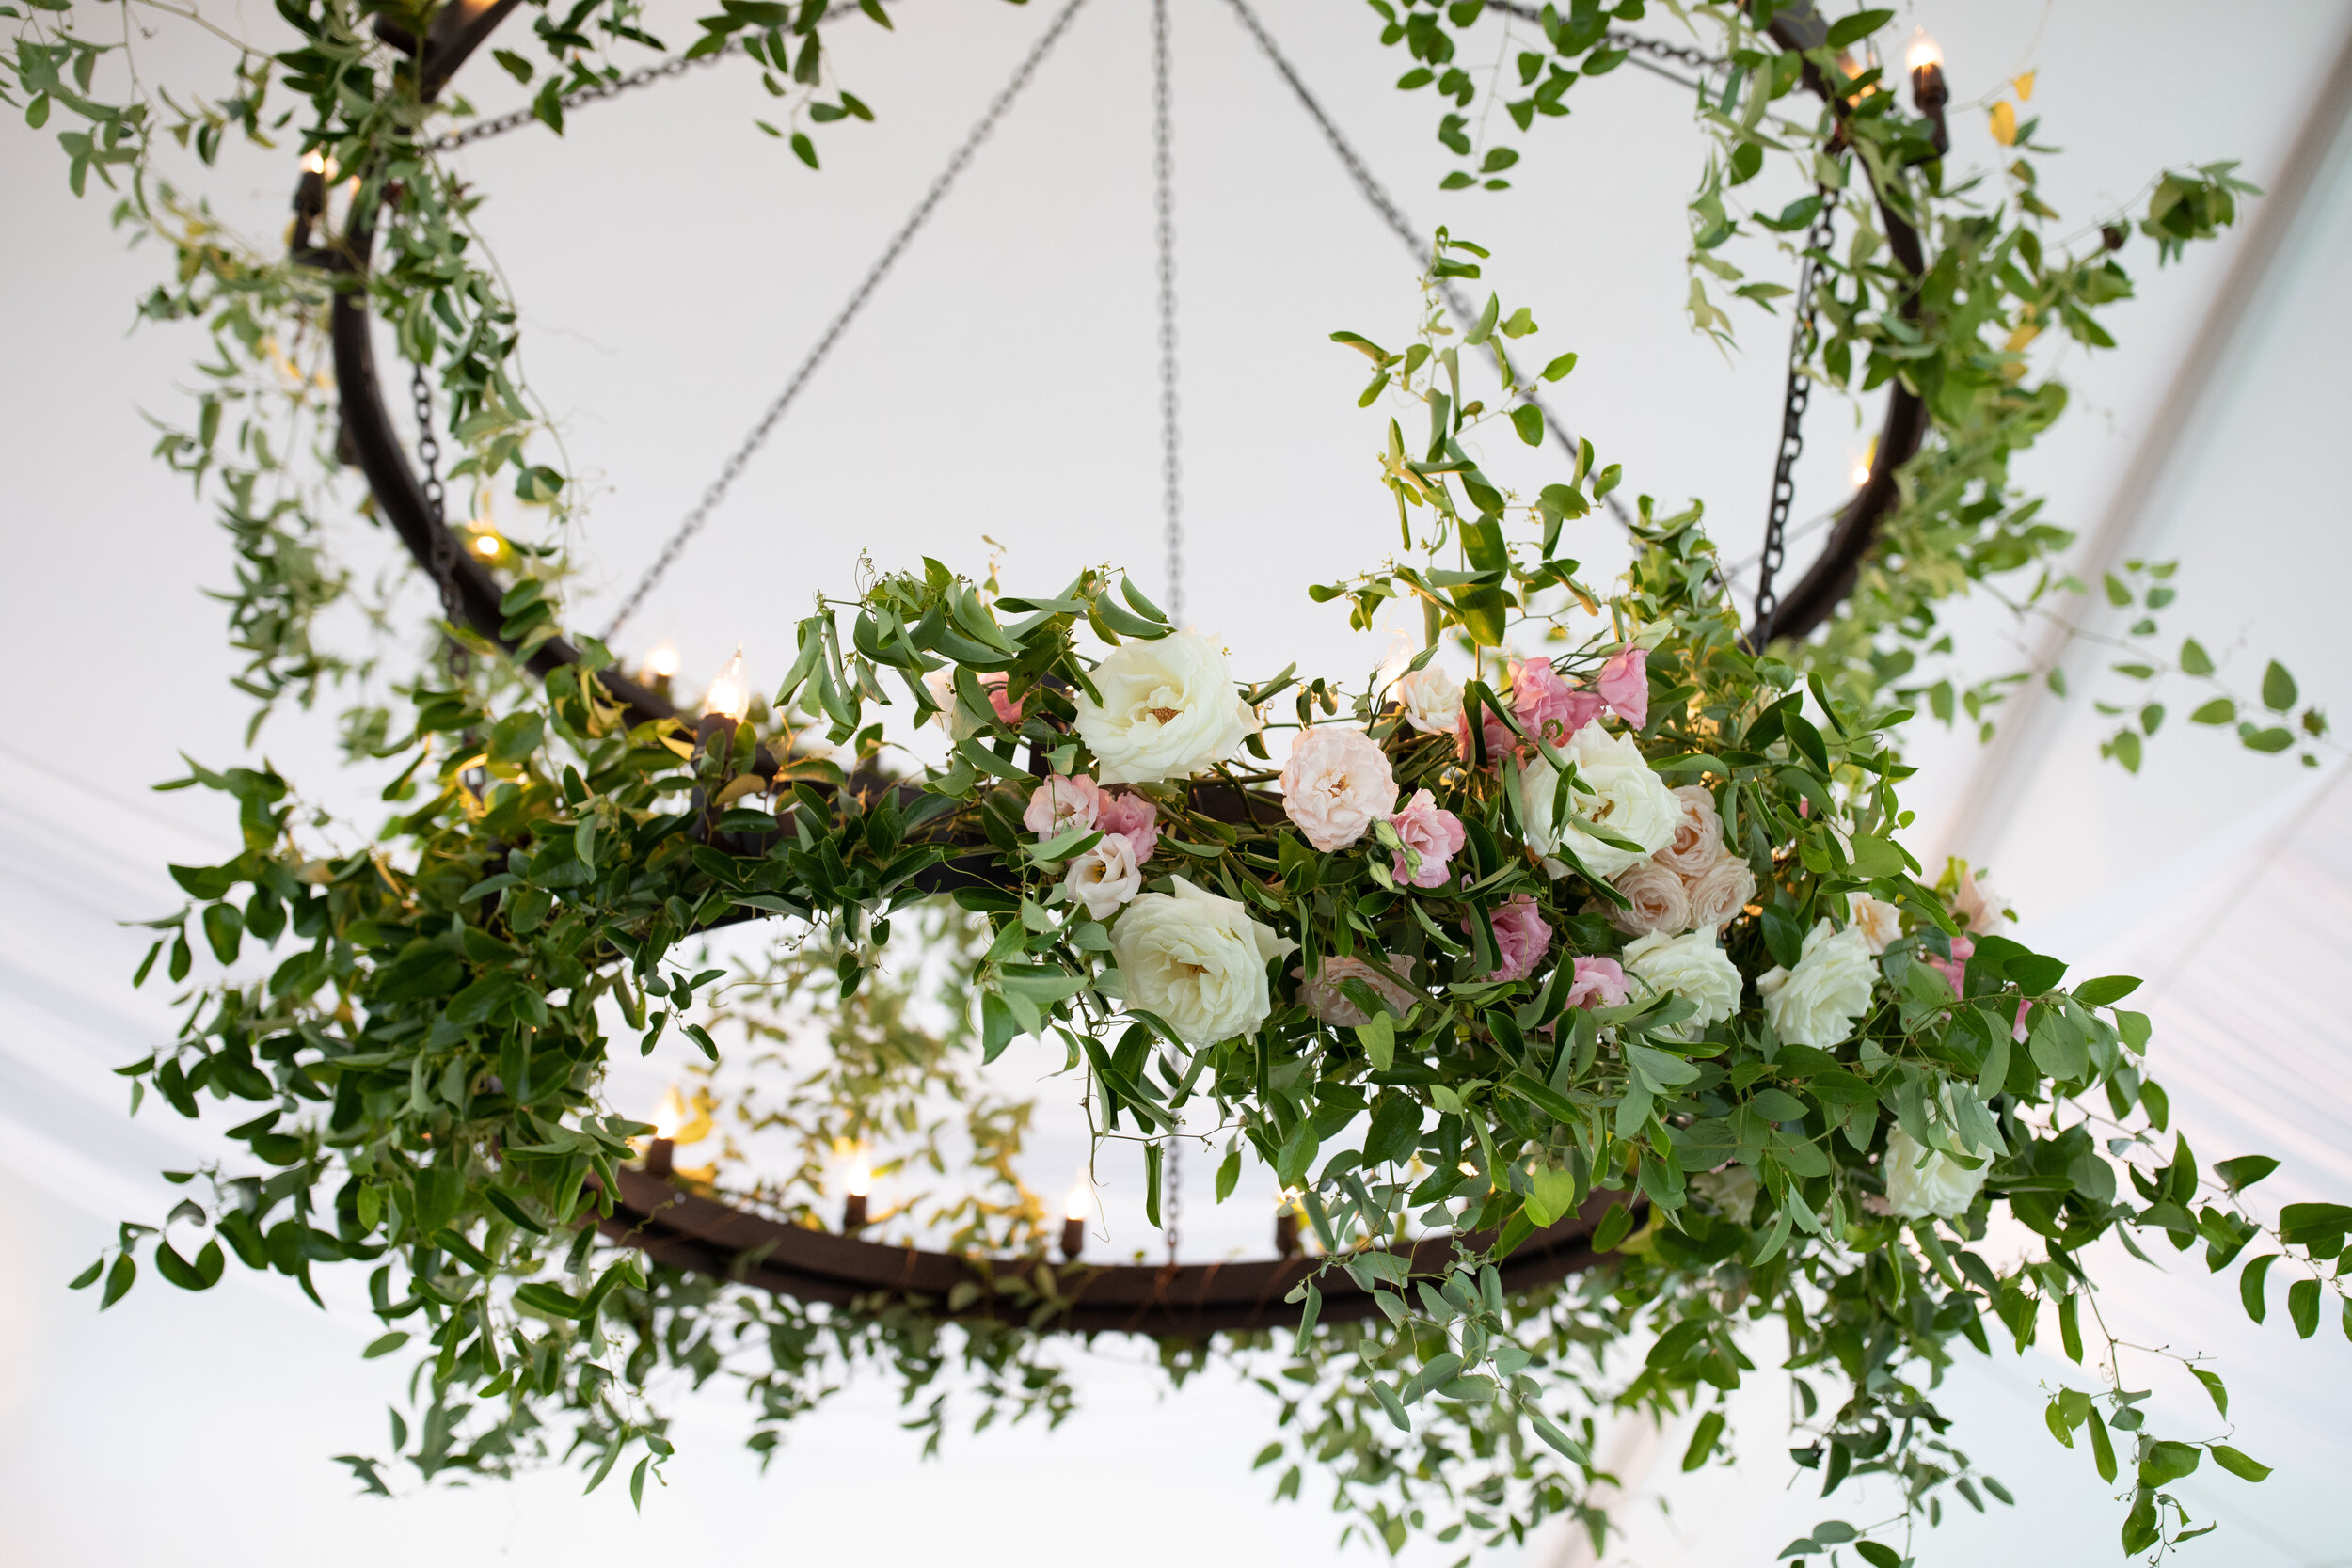 Double chandelier with vines and lush greenery with blush and white flower accents. Nashville luxury wedding and event floral design.